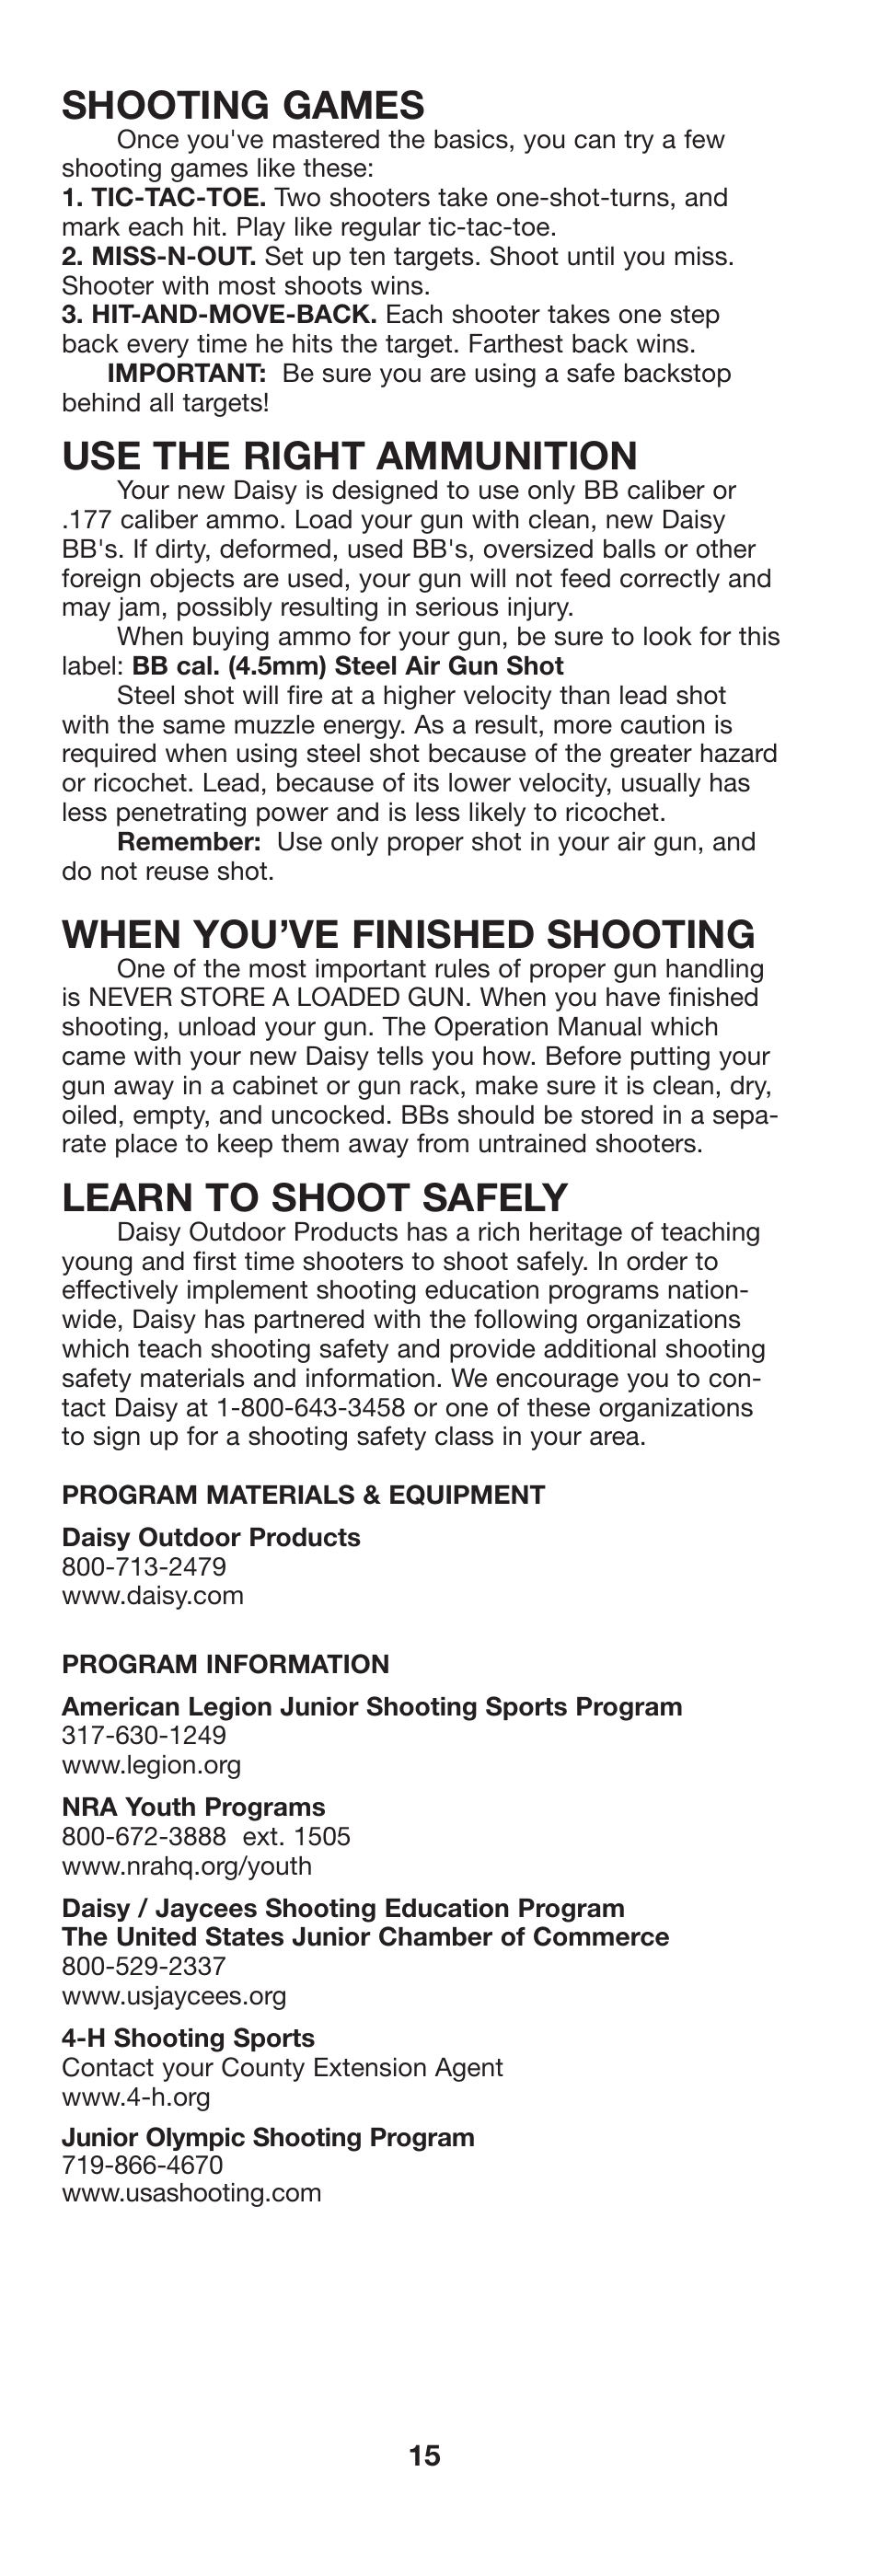 Shooting games, Use the right ammunition, When you’ve finished shooting | Learn to shoot safely | Daisy 105 Buck User Manual | Page 16 / 36